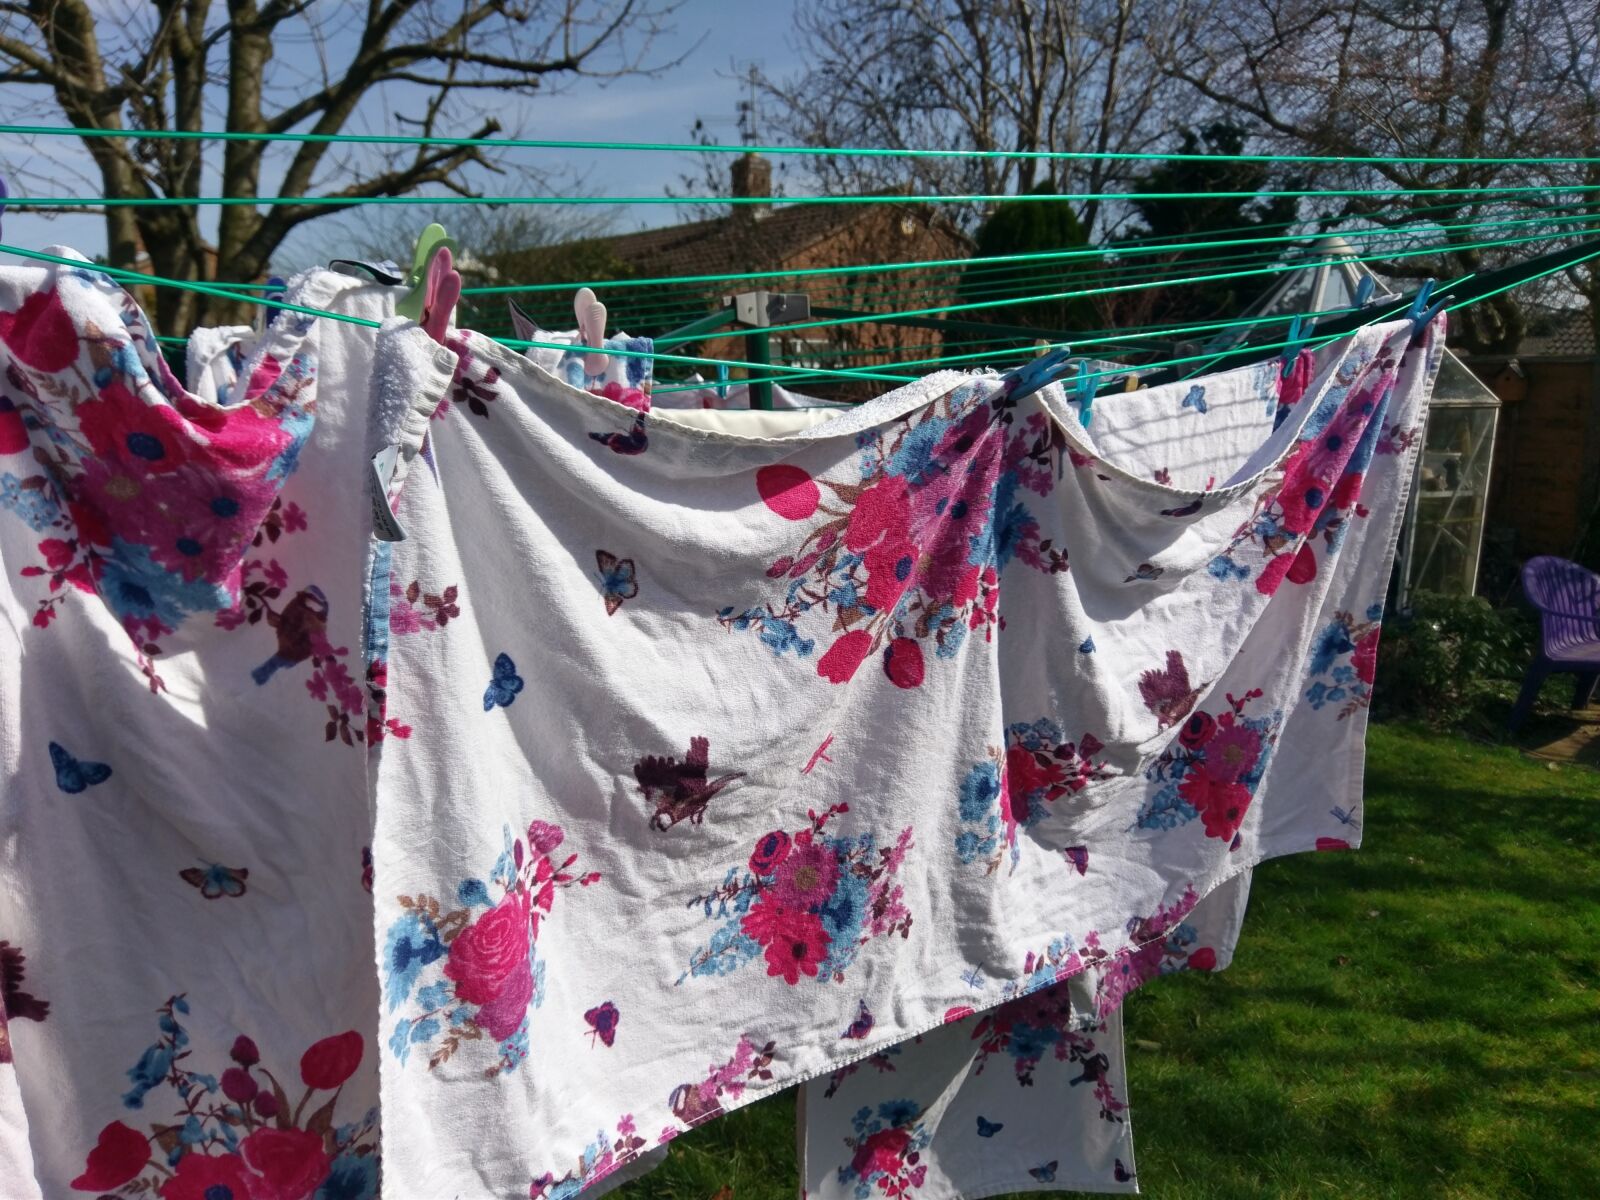 HTC 10 sample photo. Outdoors, laundry, clothesline photography